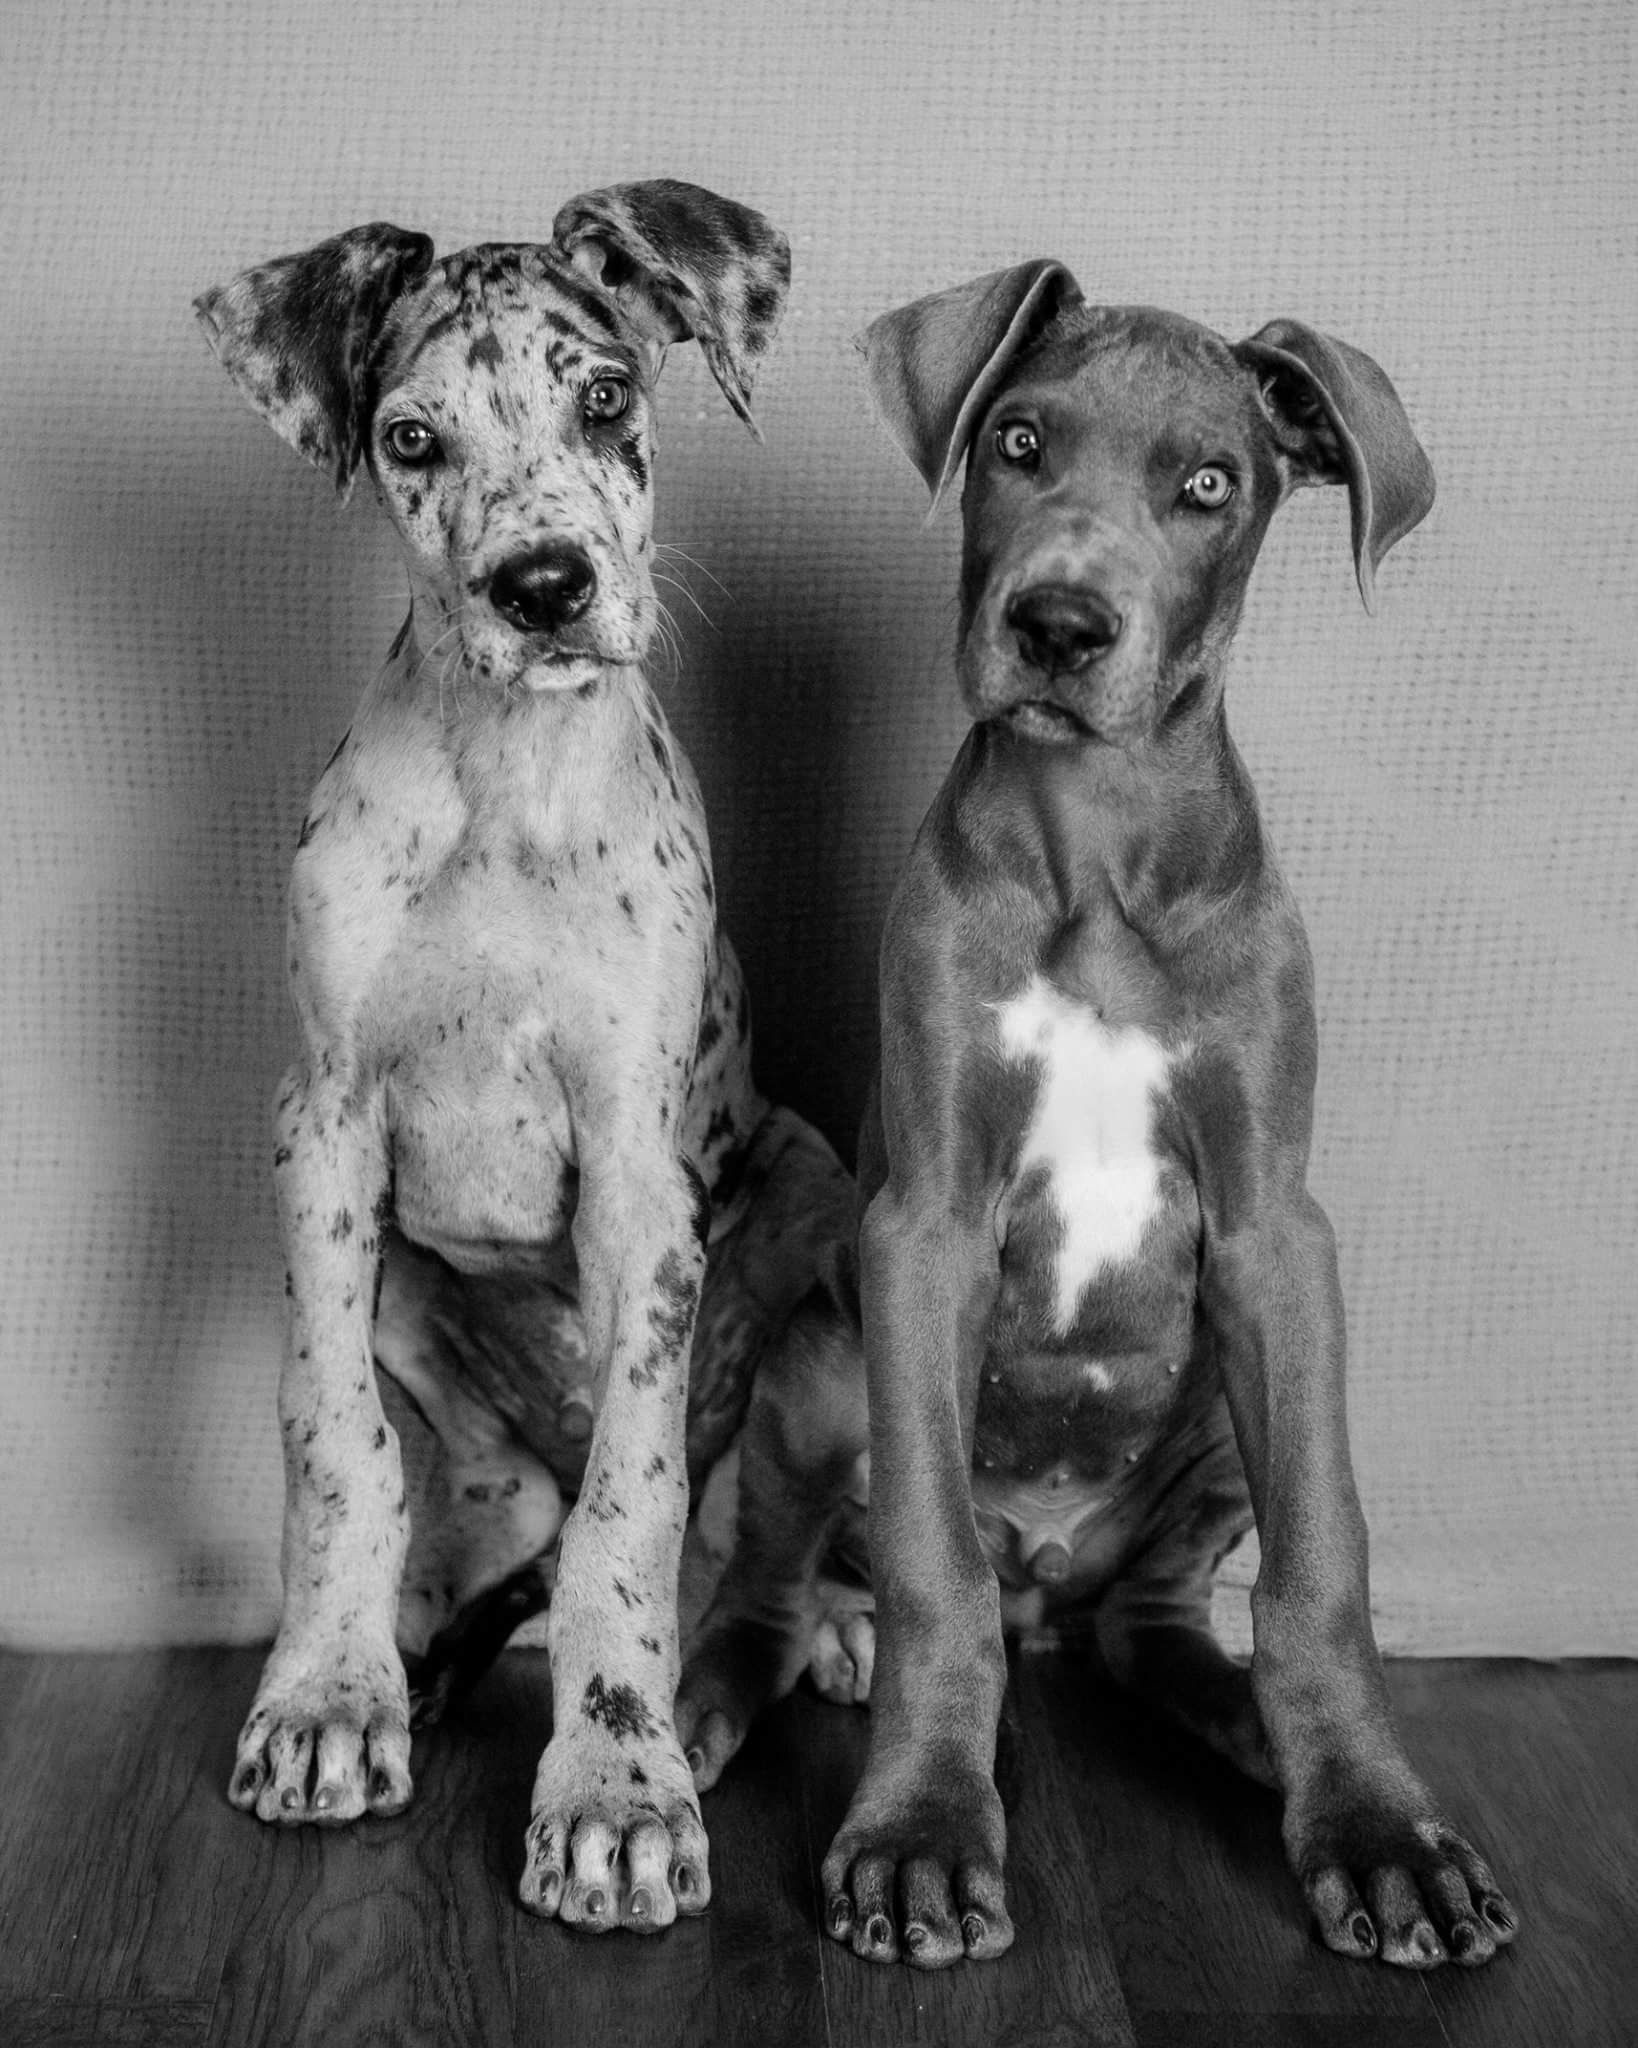 Great Dane: Black and white, Family dogs typically gentle around children, smaller dogs and cats. 1640x2050 HD Wallpaper.